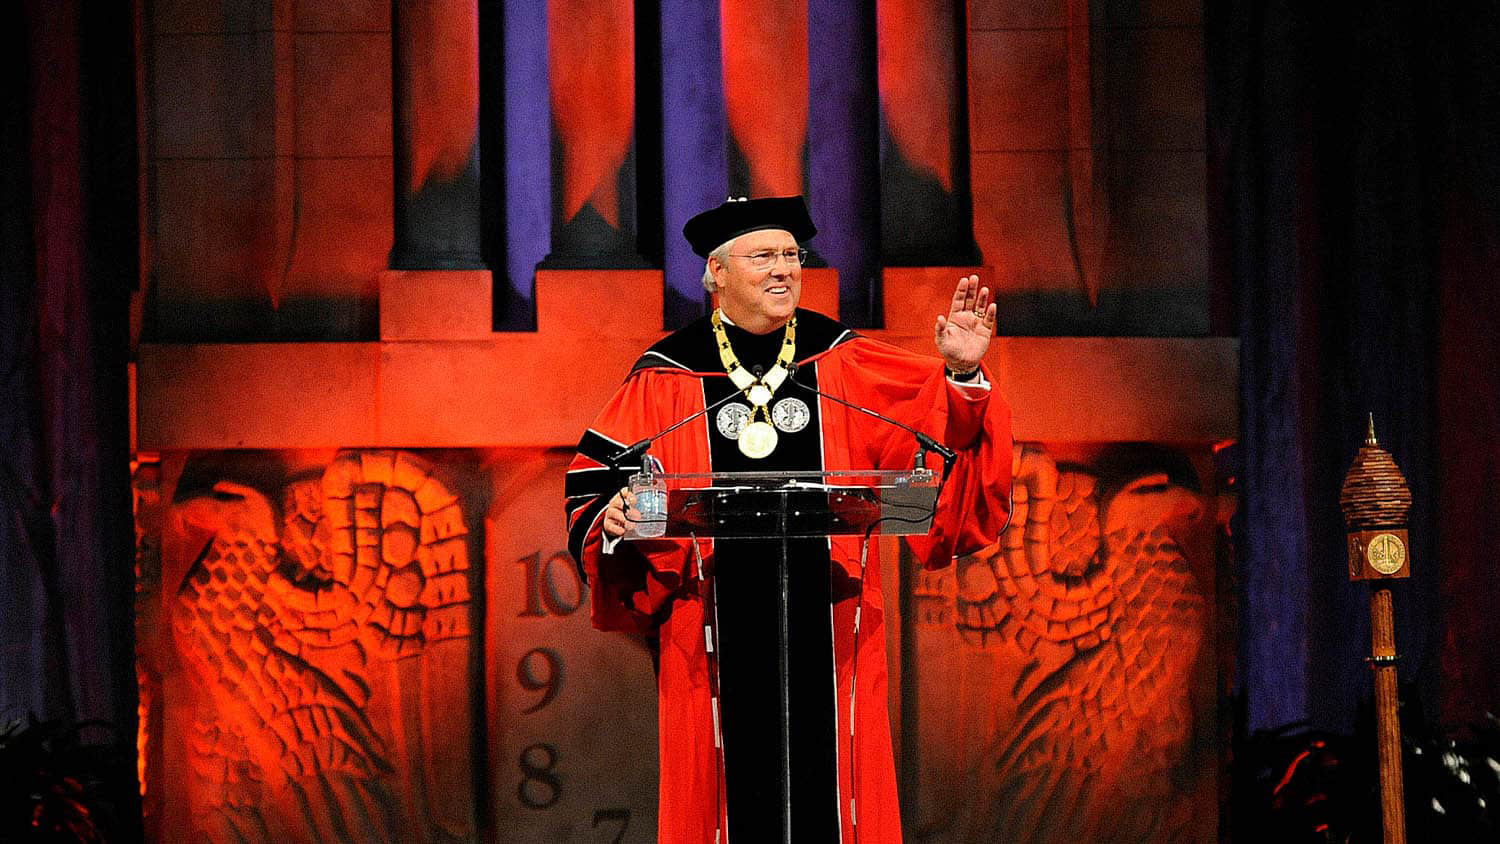 Chancellor Randy Woodson waves to the crowd at his installation ceremony in 2010.